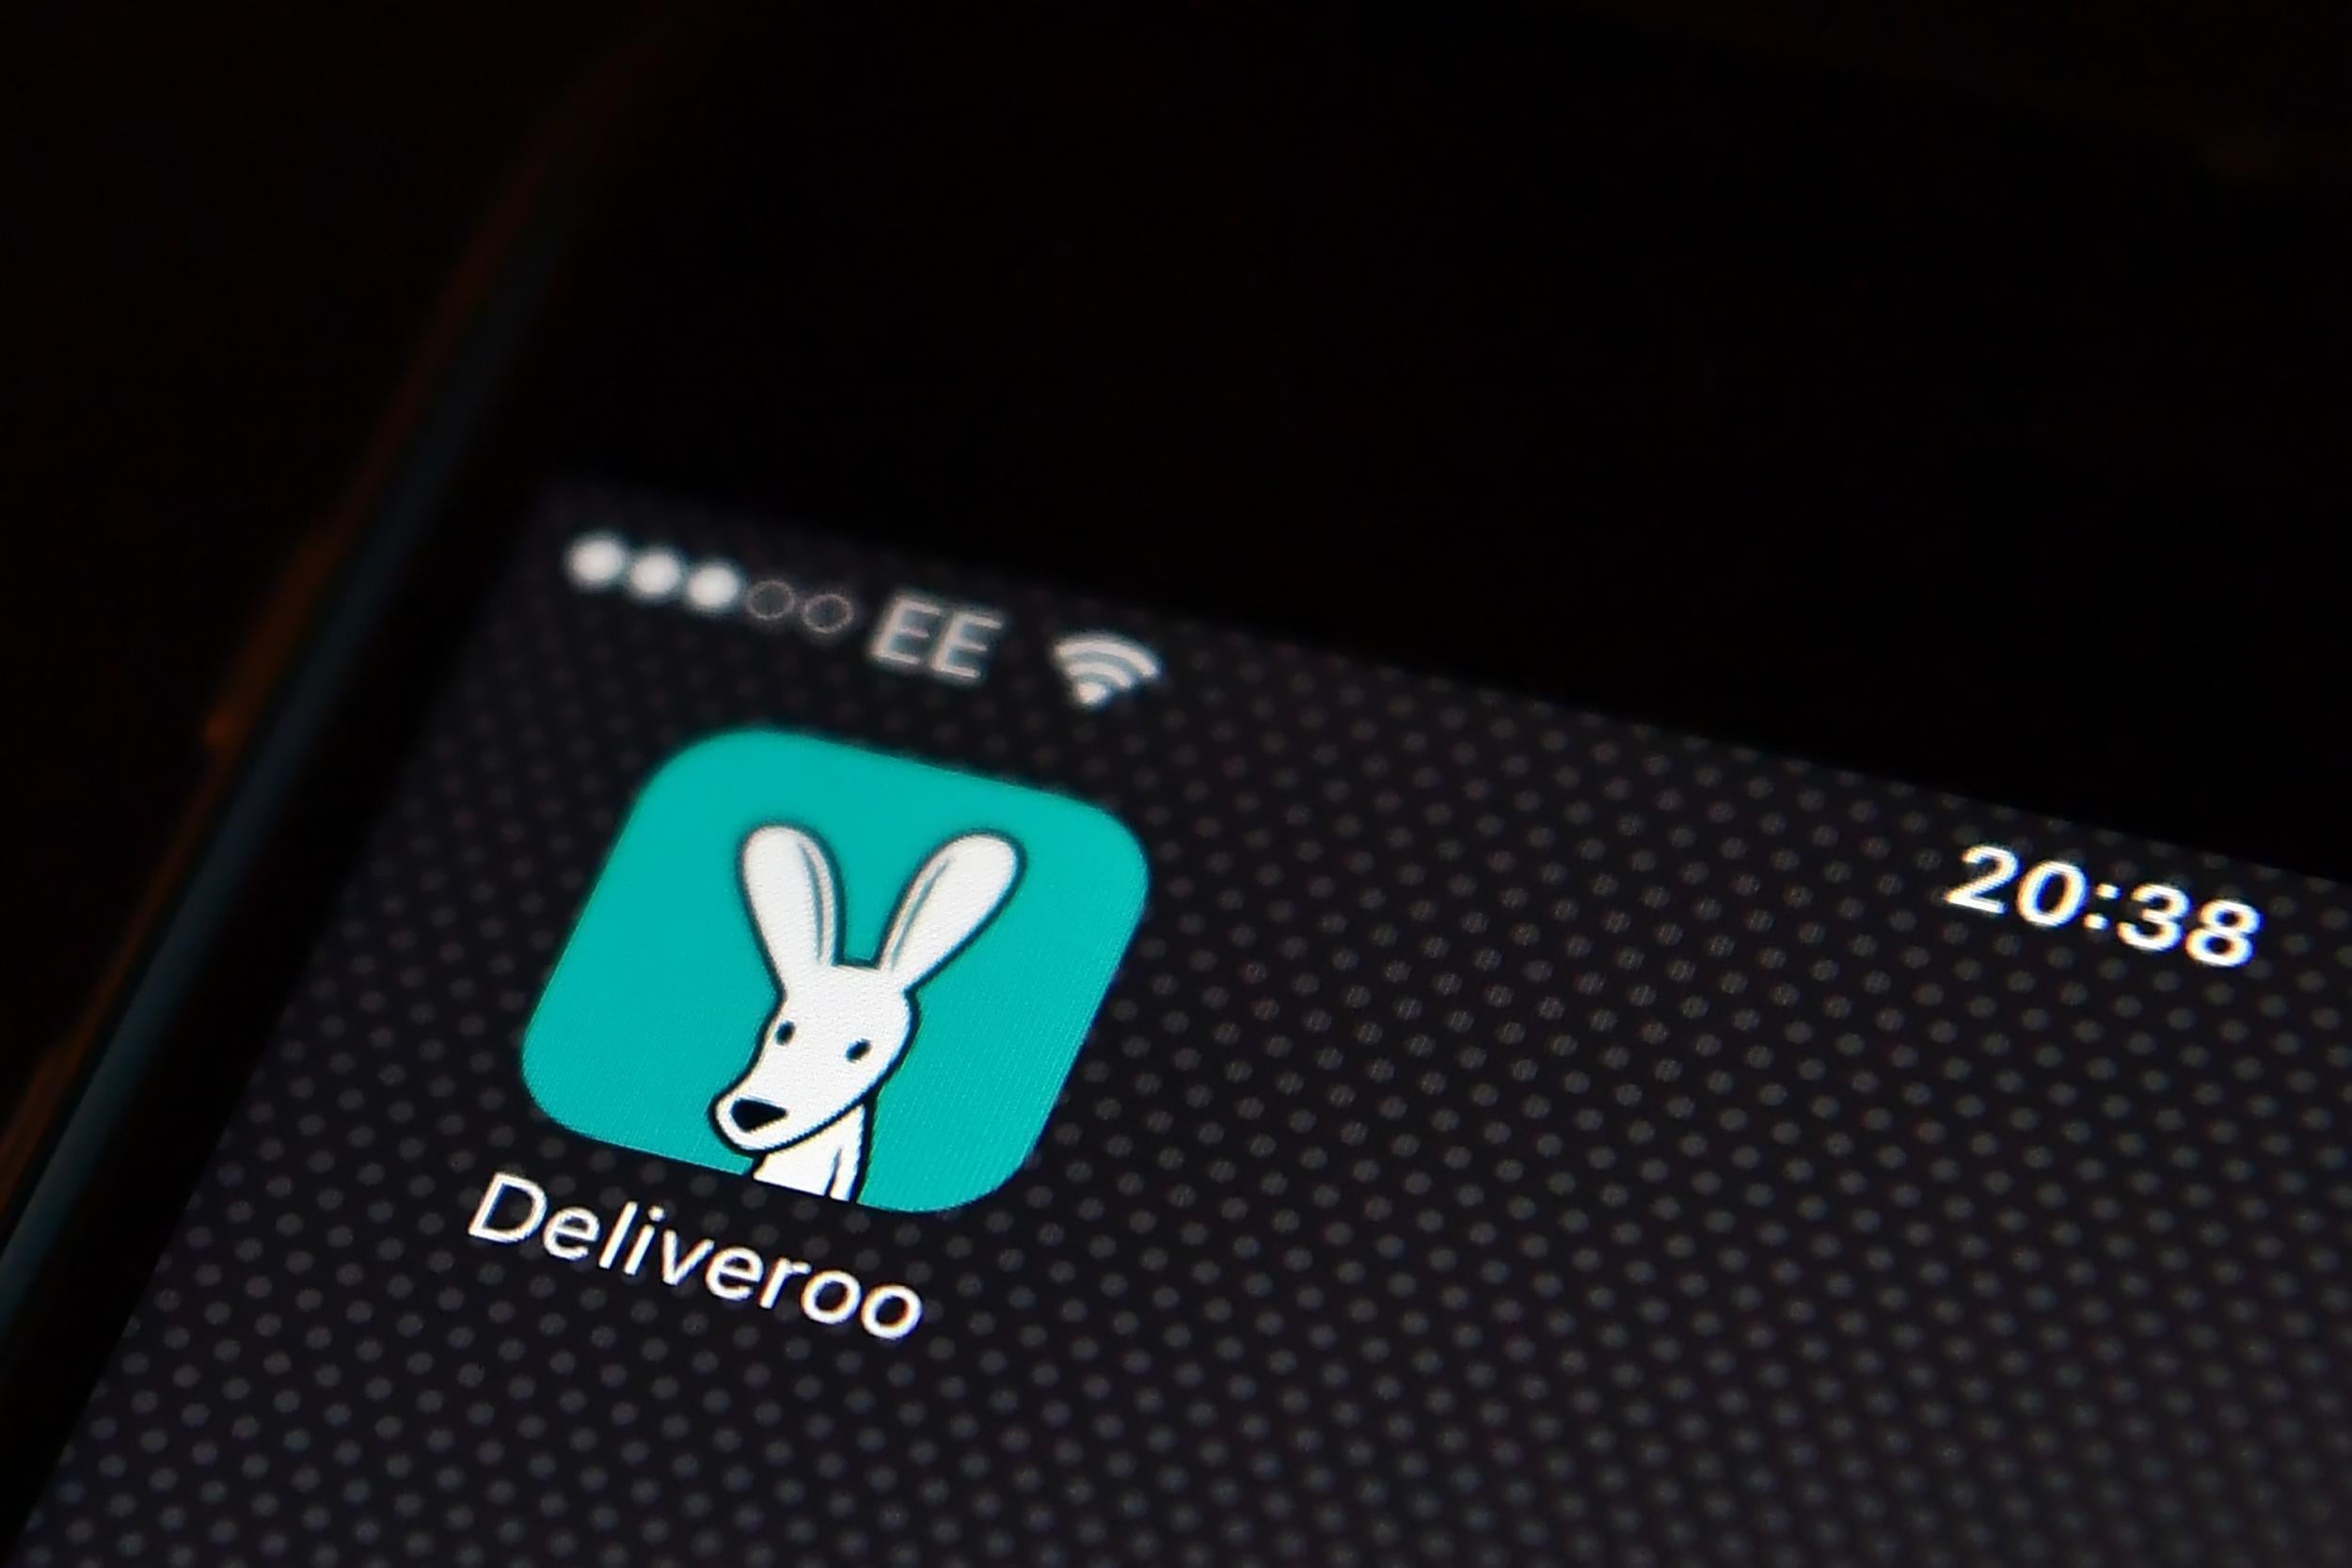 Deliveroo now partners with more than 8,000 restaurants in the UK